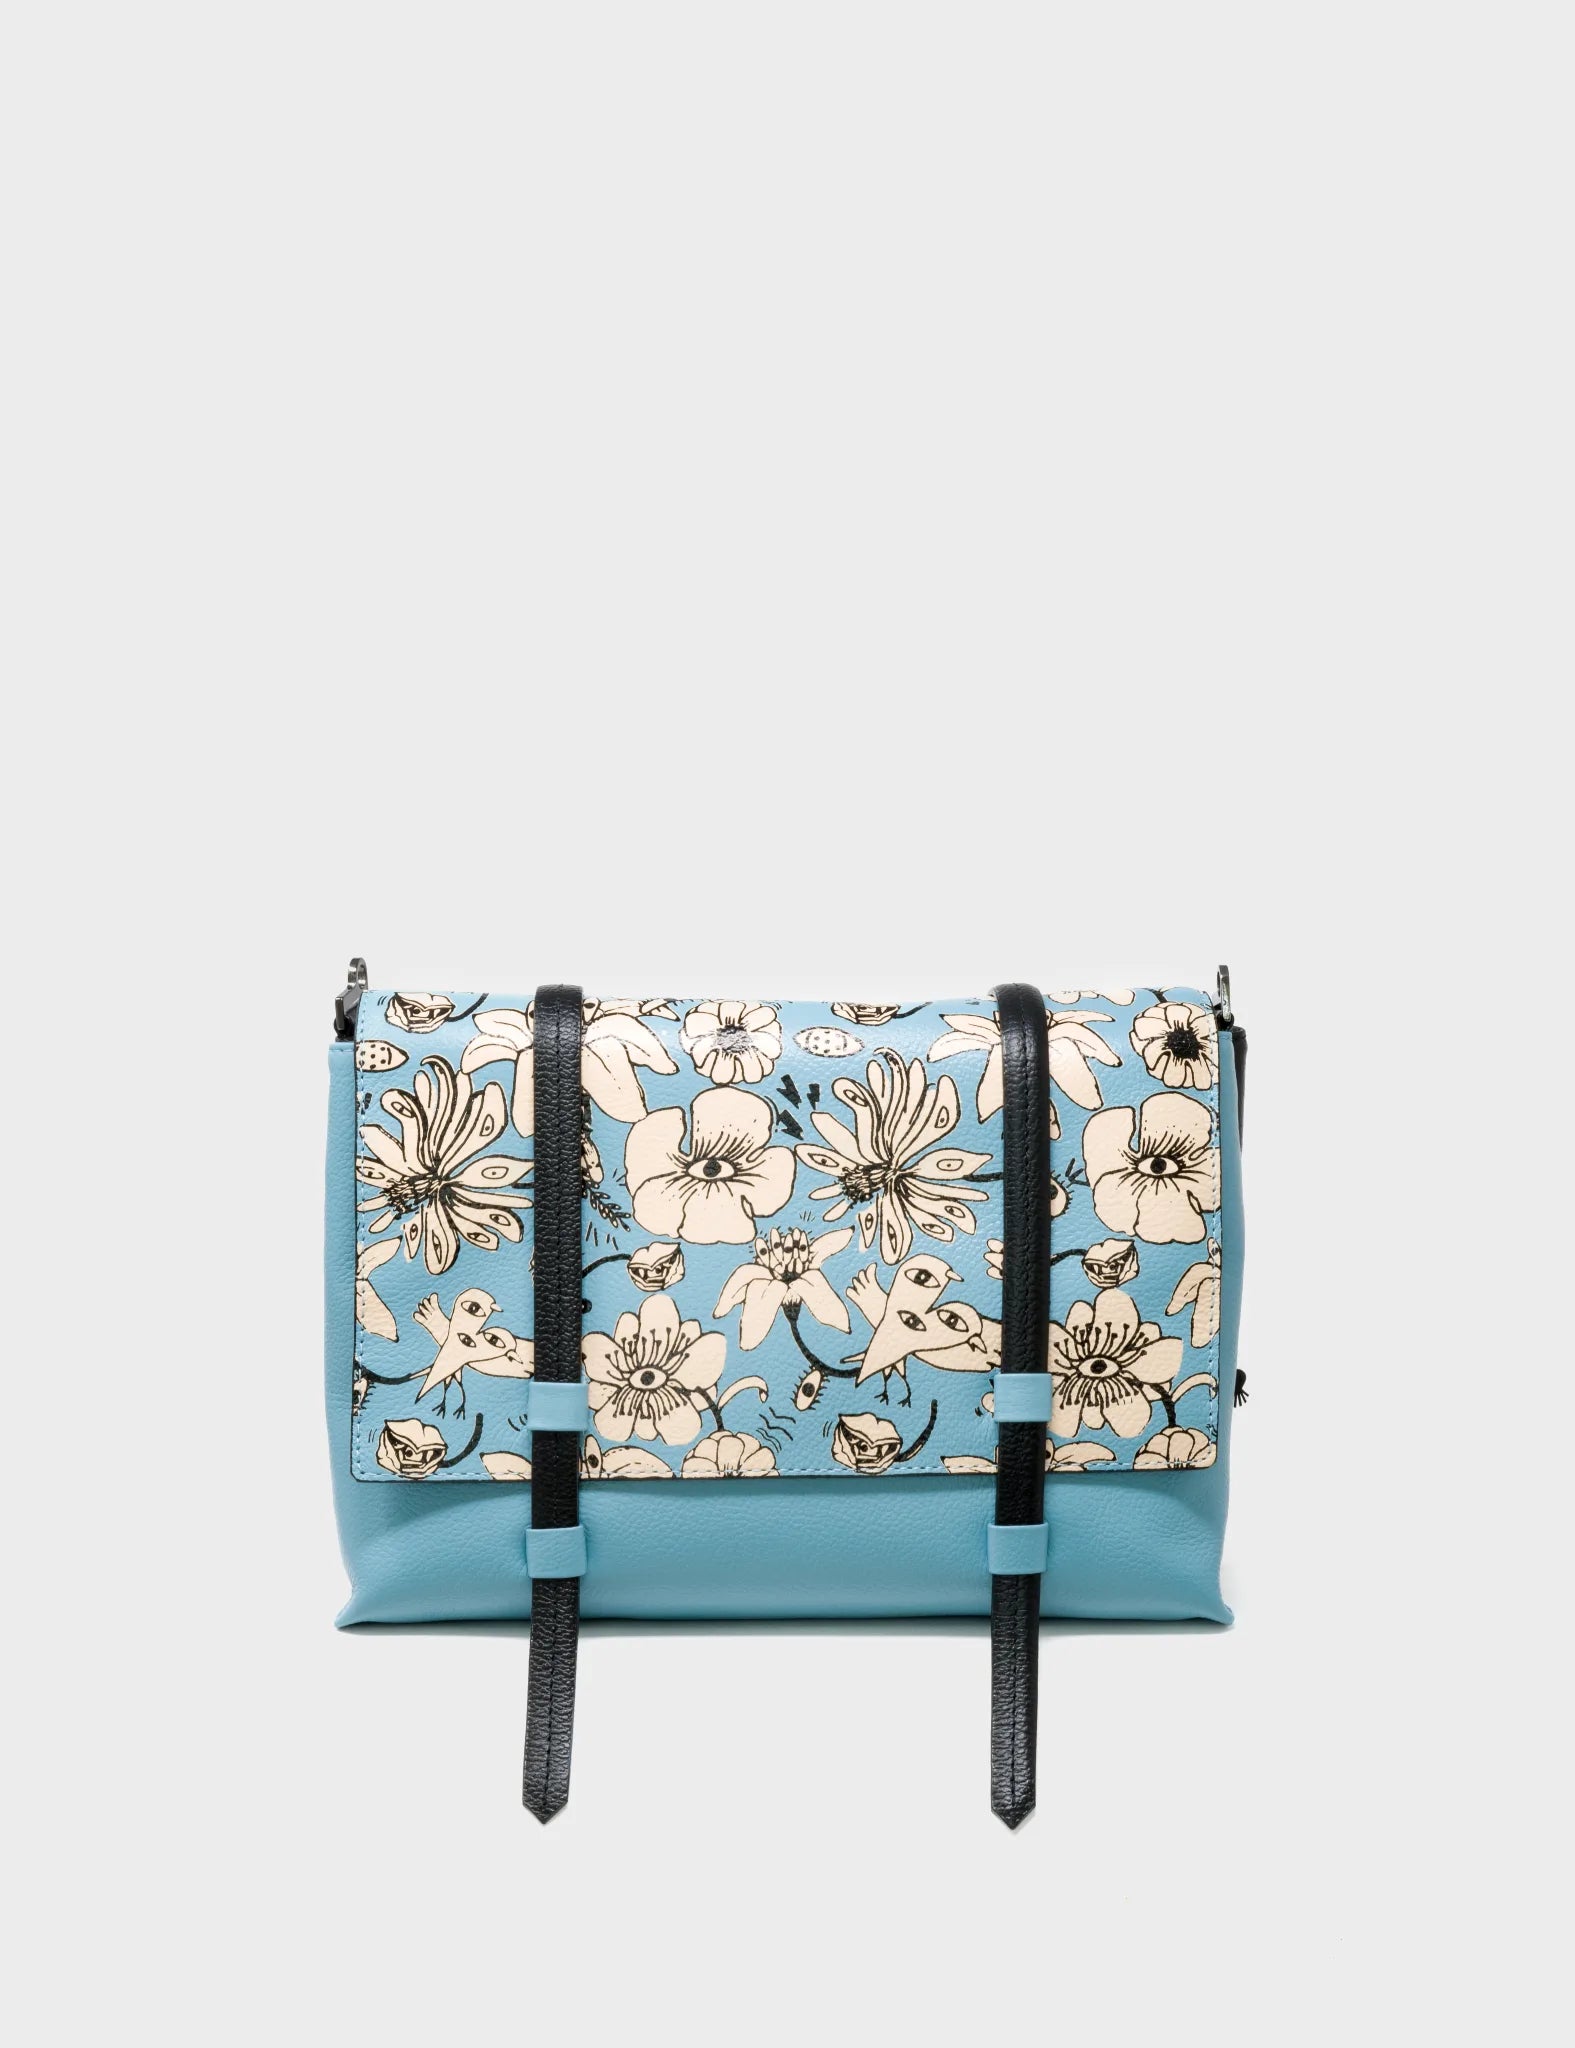 Reversible Small Messenger Bag Balck And Blue Leather - Floral Print - front